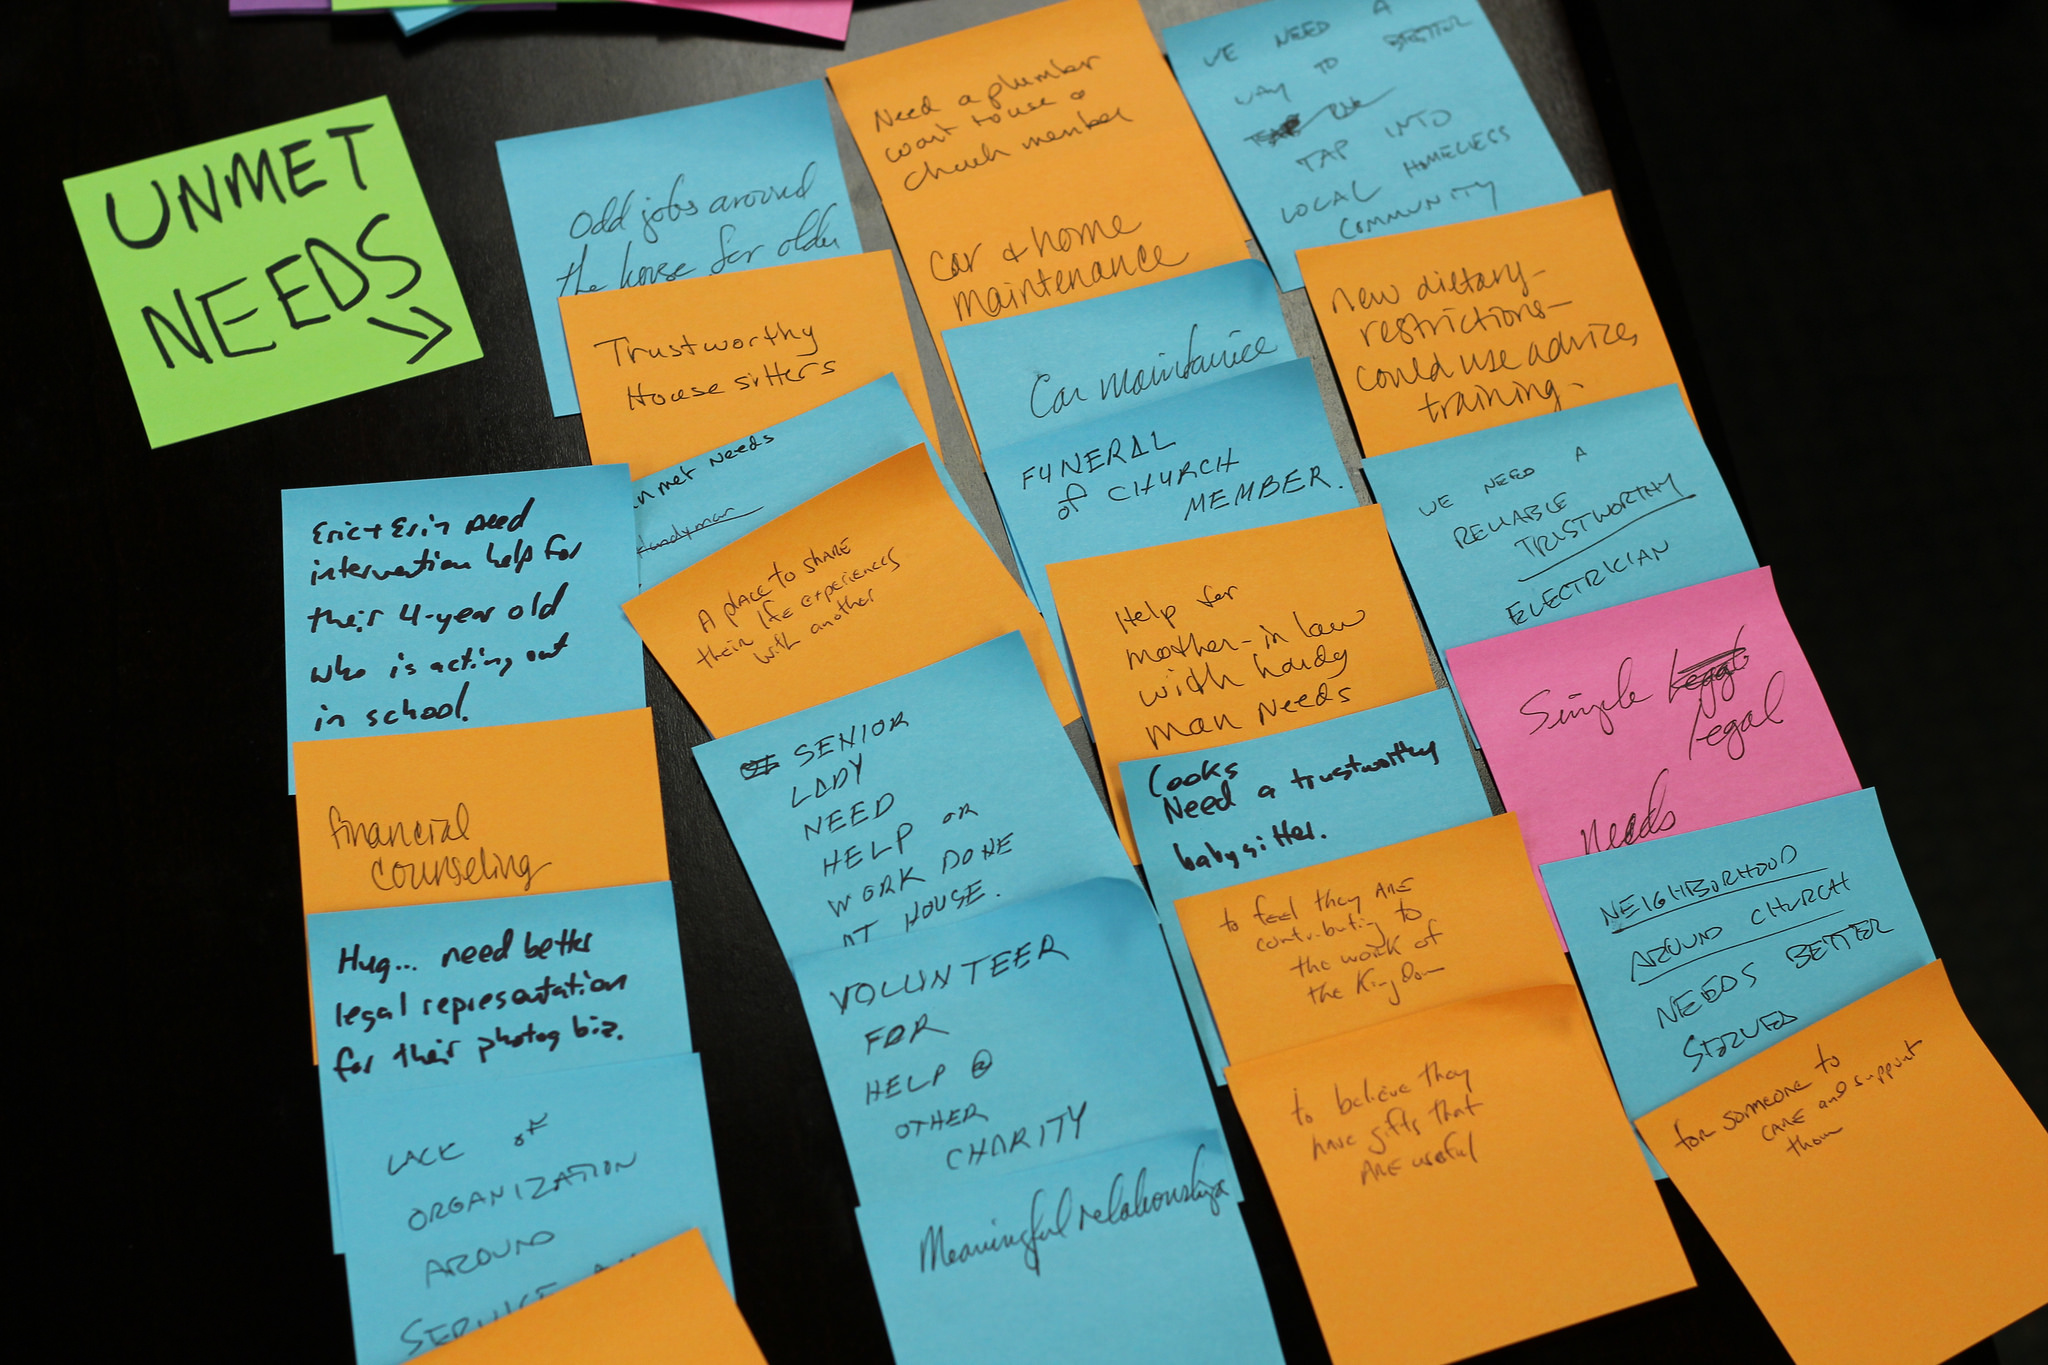 Post its help the CauseLabs team bring their ideas together